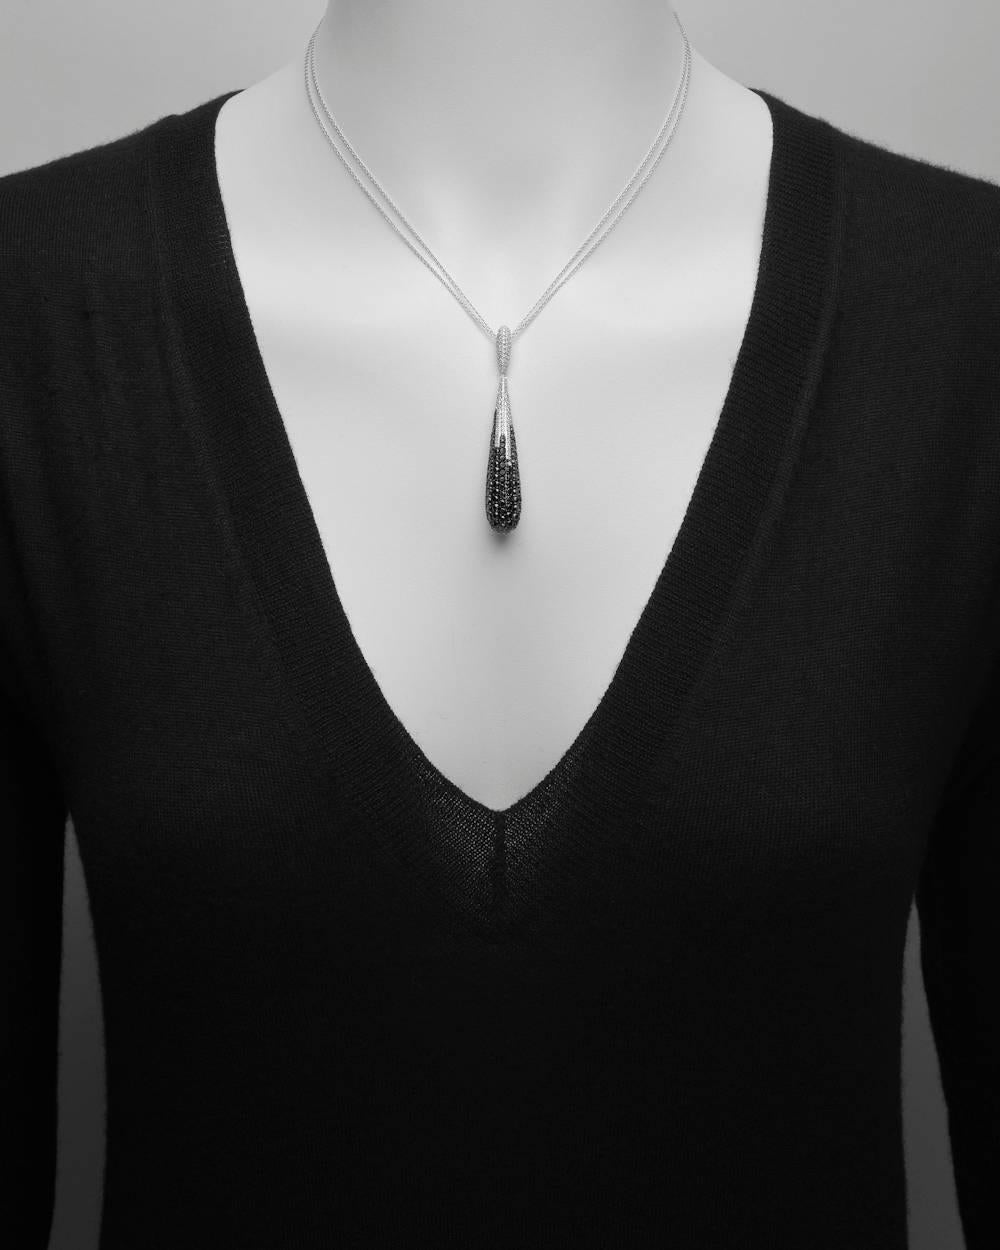 Elongated teardrop pendant necklace, set with 91 round black diamonds weighing approximately 2.28 total carats and 125 round near-colorless diamonds weighing approximately 0.94 total carats (G-color, SI-clarity), in 14k white gold, stamped 'YA'. The